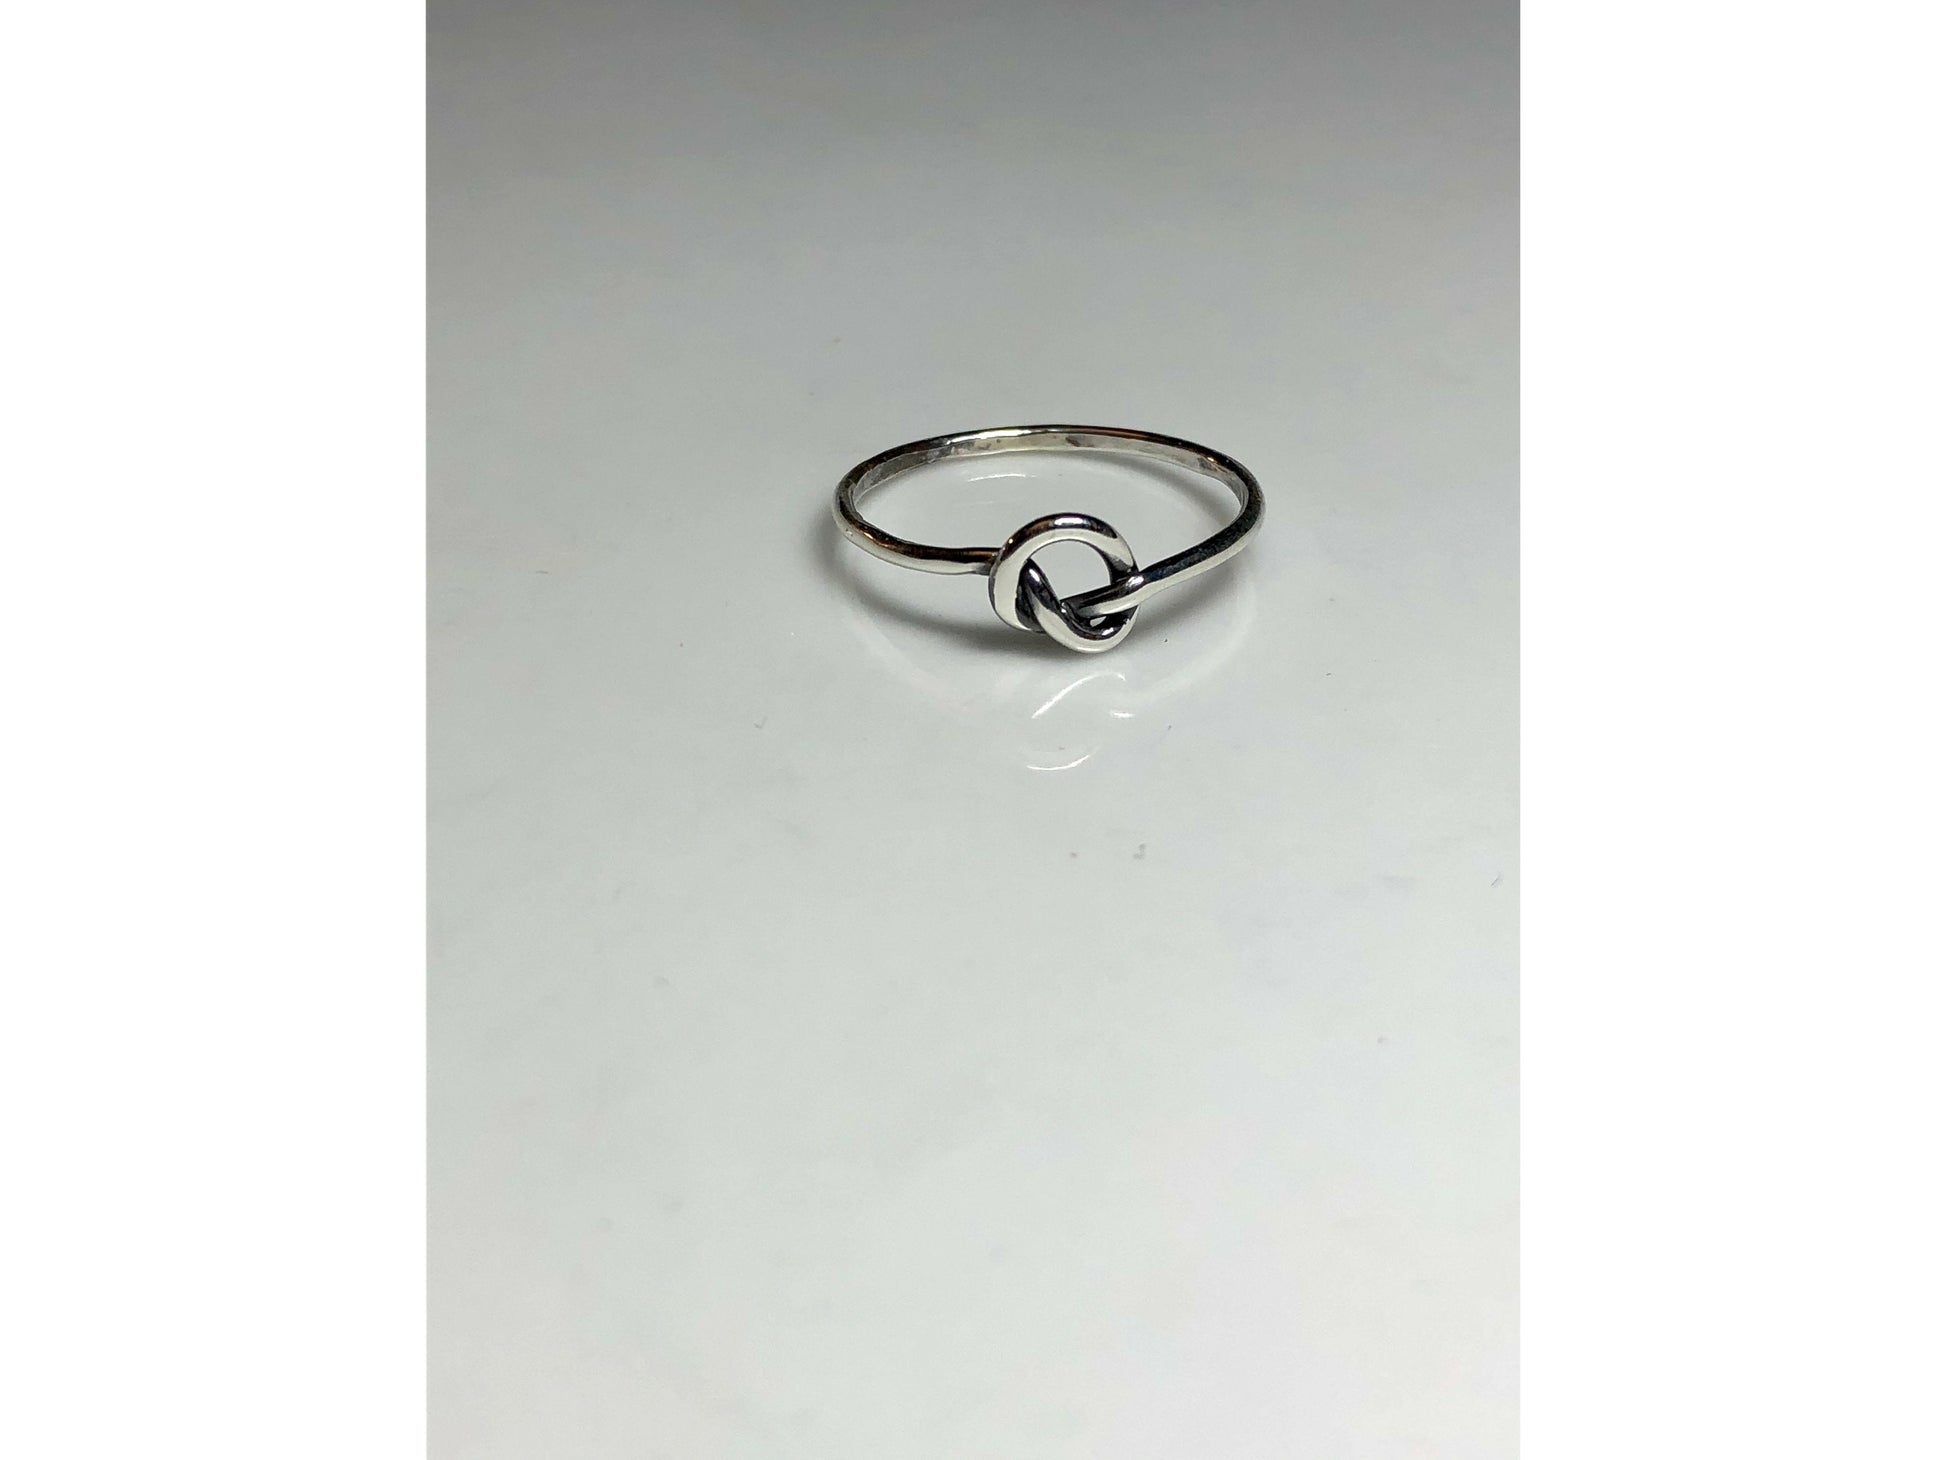 sterling-silver-knot-ring-silver-knot-ring-infinity-ring-promise-ring-gifts-for-her-dainty-ringt-bridesmaids-gift-stackable-ring-friendship